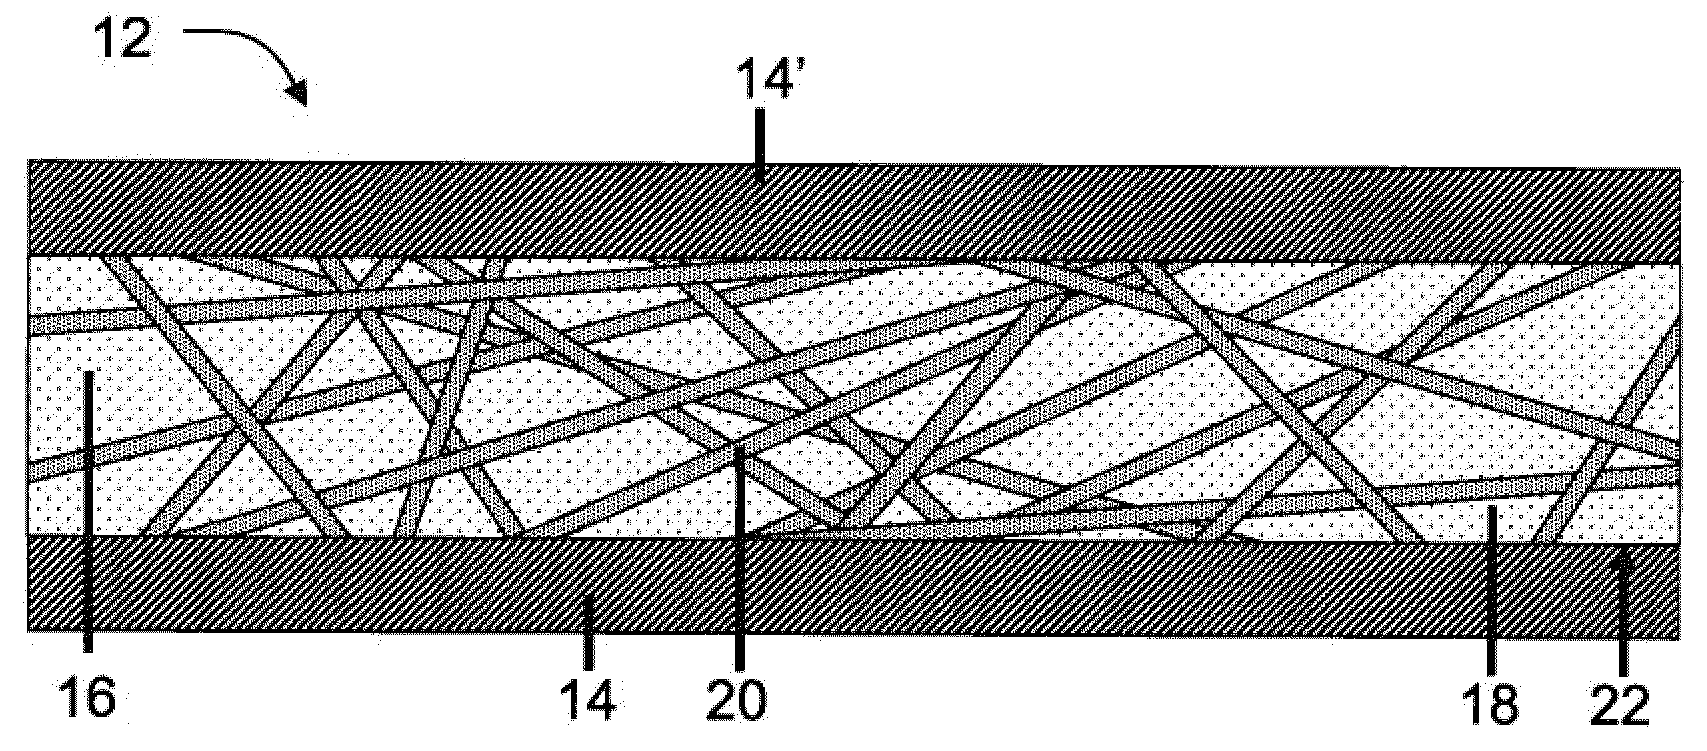 Formable light weight composites